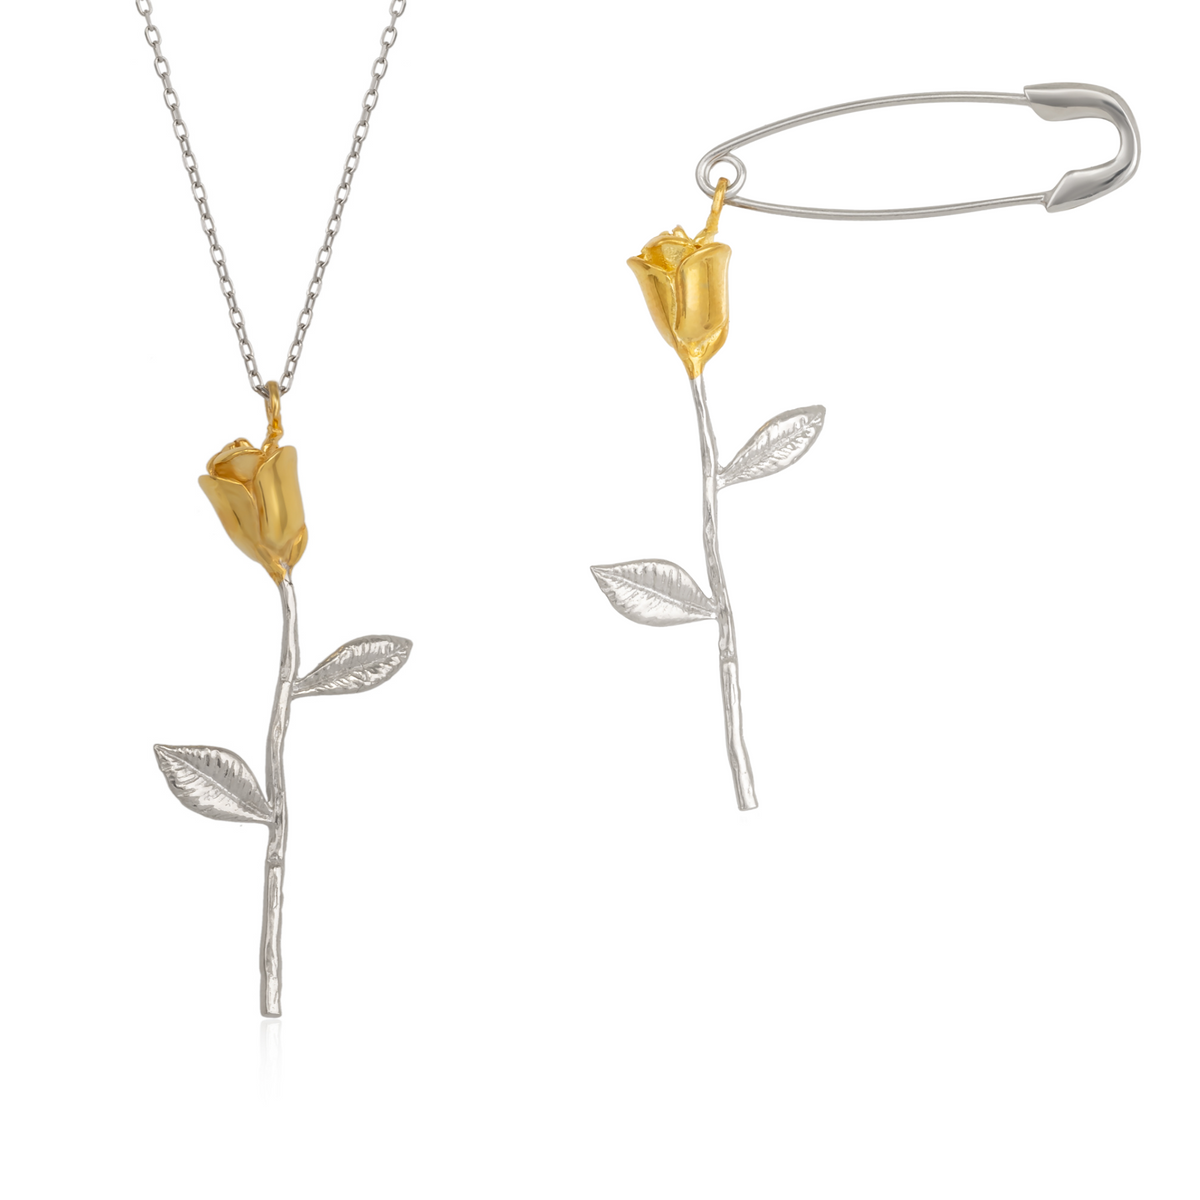 Gold Color Rose Sterling Silver Necklace and Safety Pin Earring Set